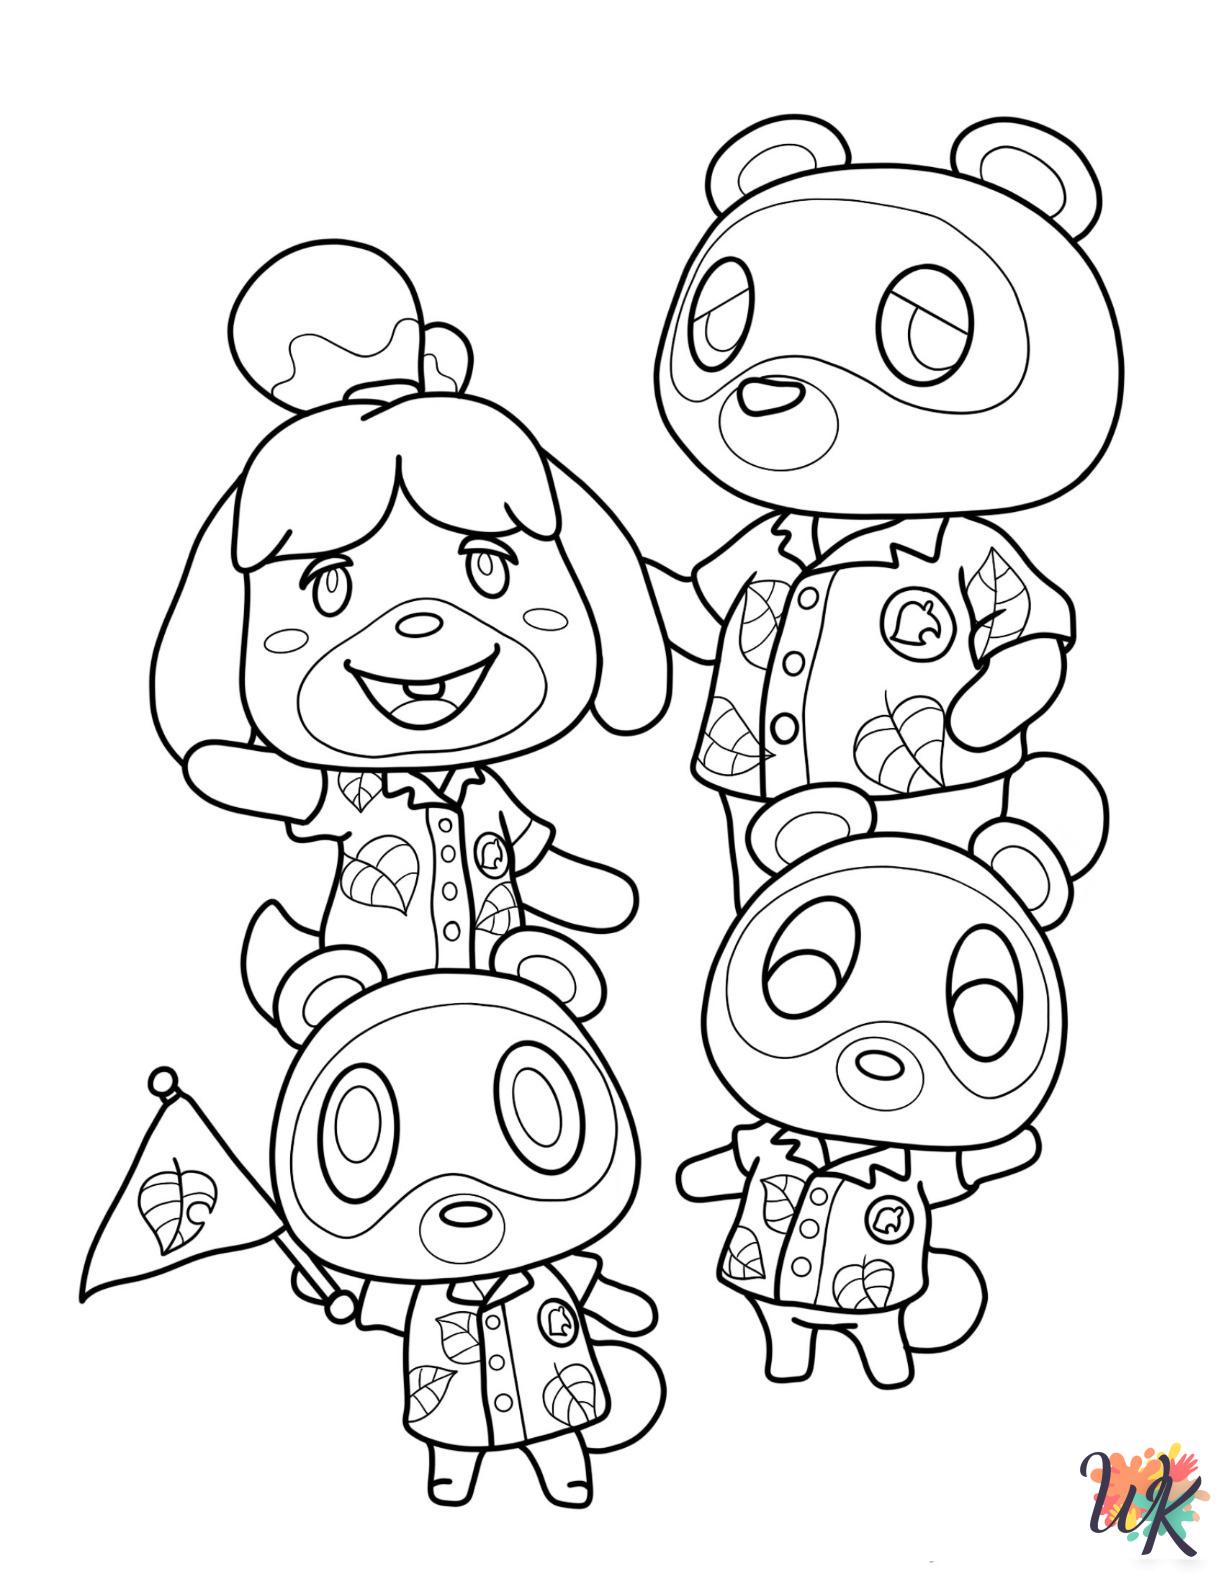 Animal Crossing coloring pages printable